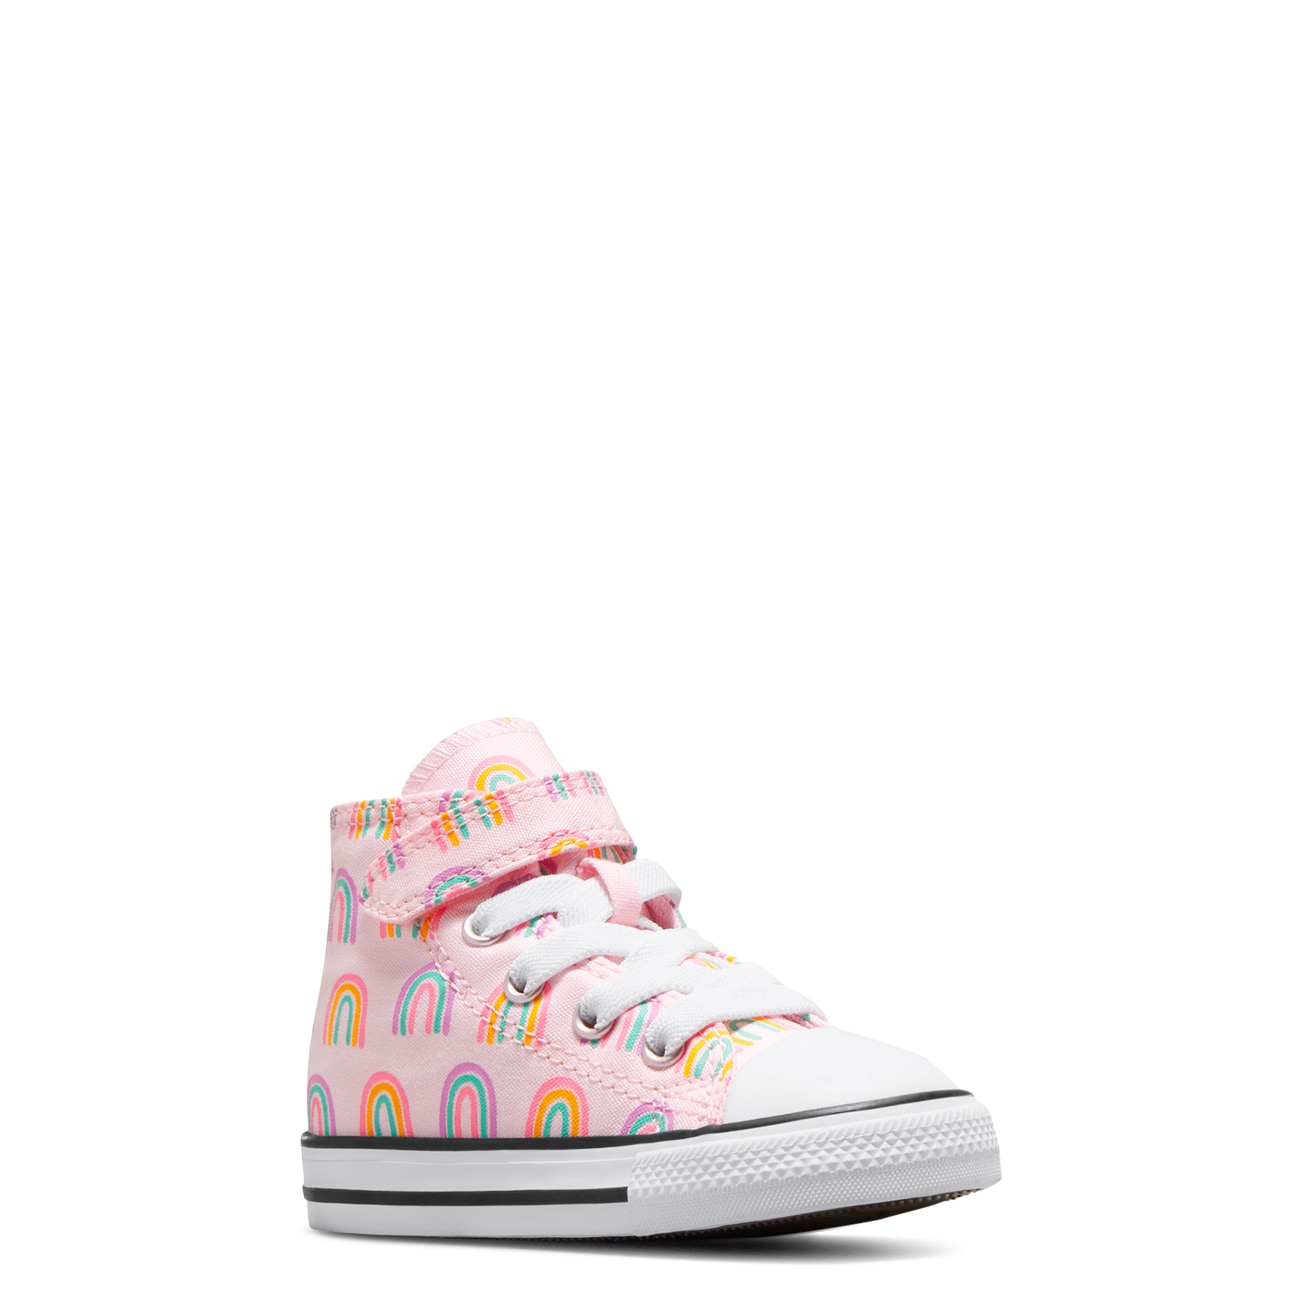 Toddler Girls' Chuck Taylor All Star Easy-On Rainbows High Top Sneaker